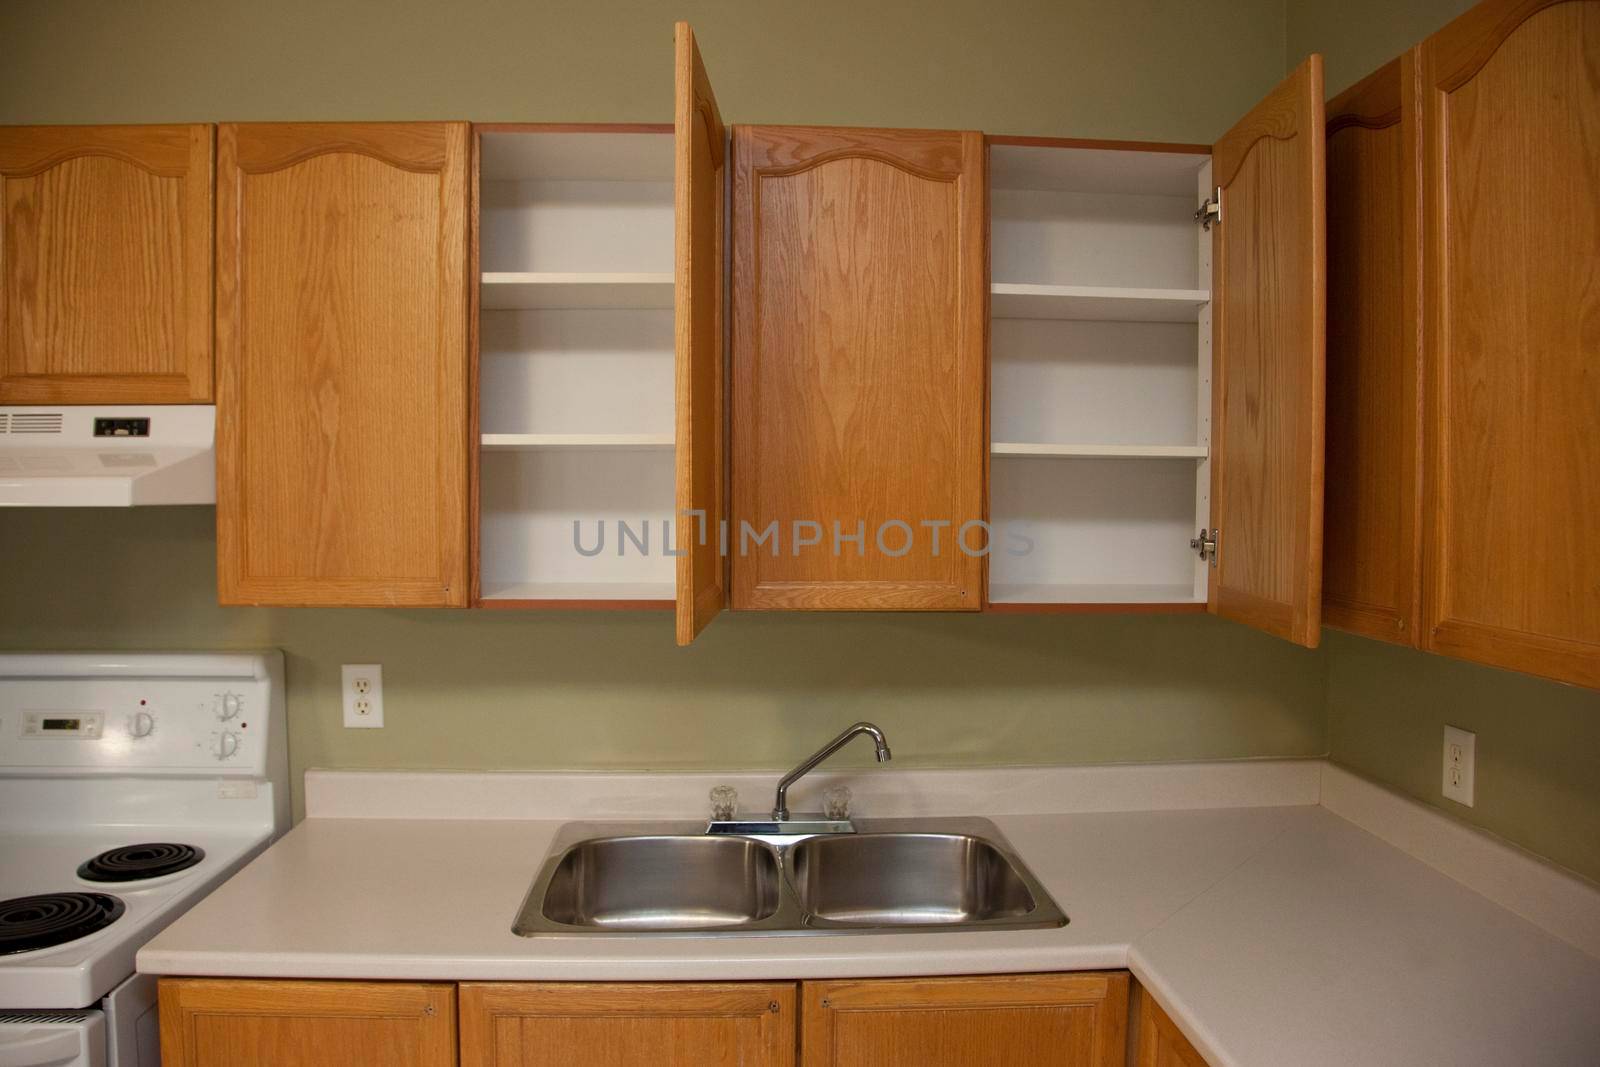 A small kitchen counter space with a sink and open, empty cupboards